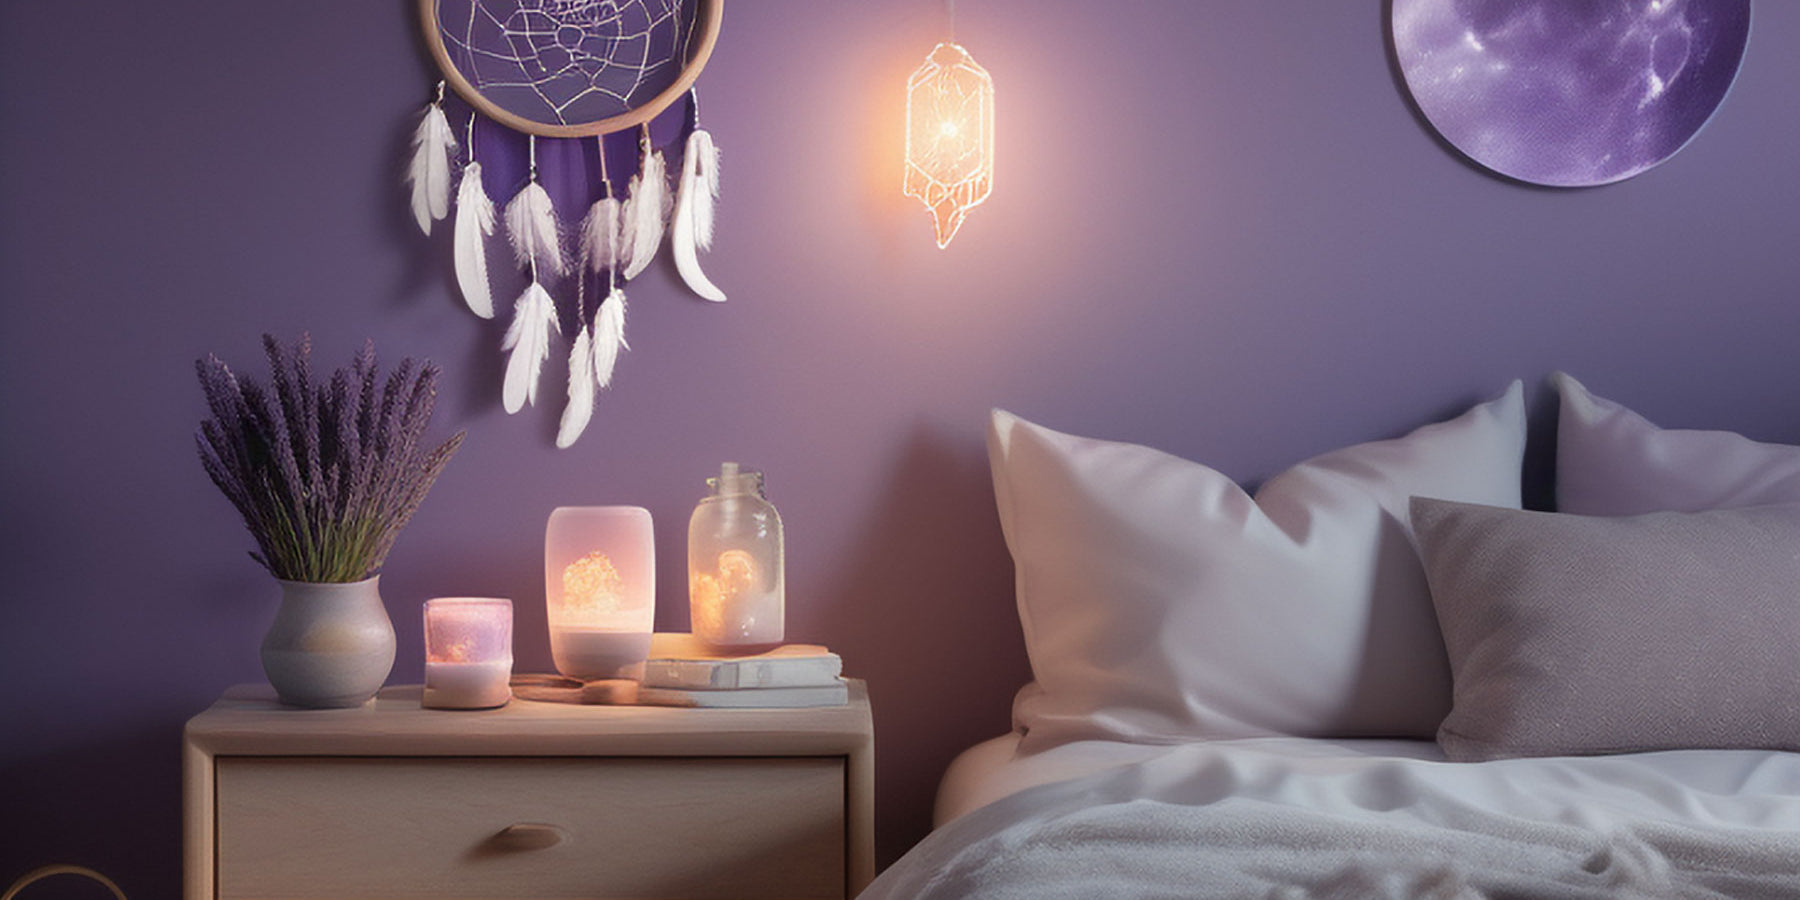 A moonlit bedroom, with soothing elements like lavender and a salt lamp.